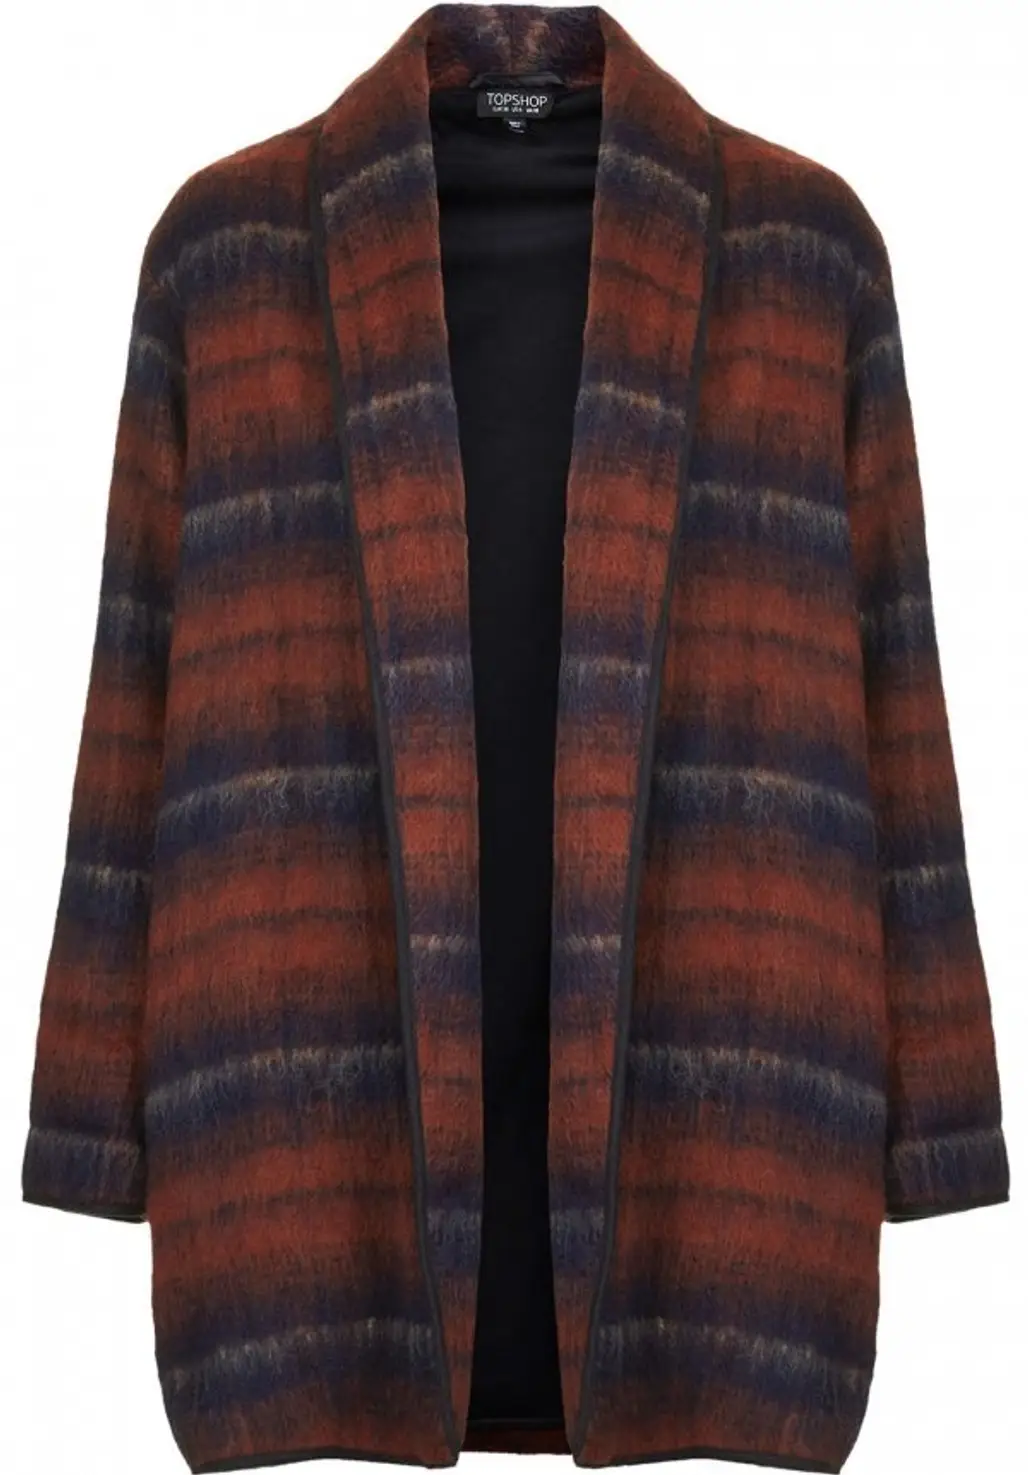 Topshop Fluffy Striped Wool Duster Jacket